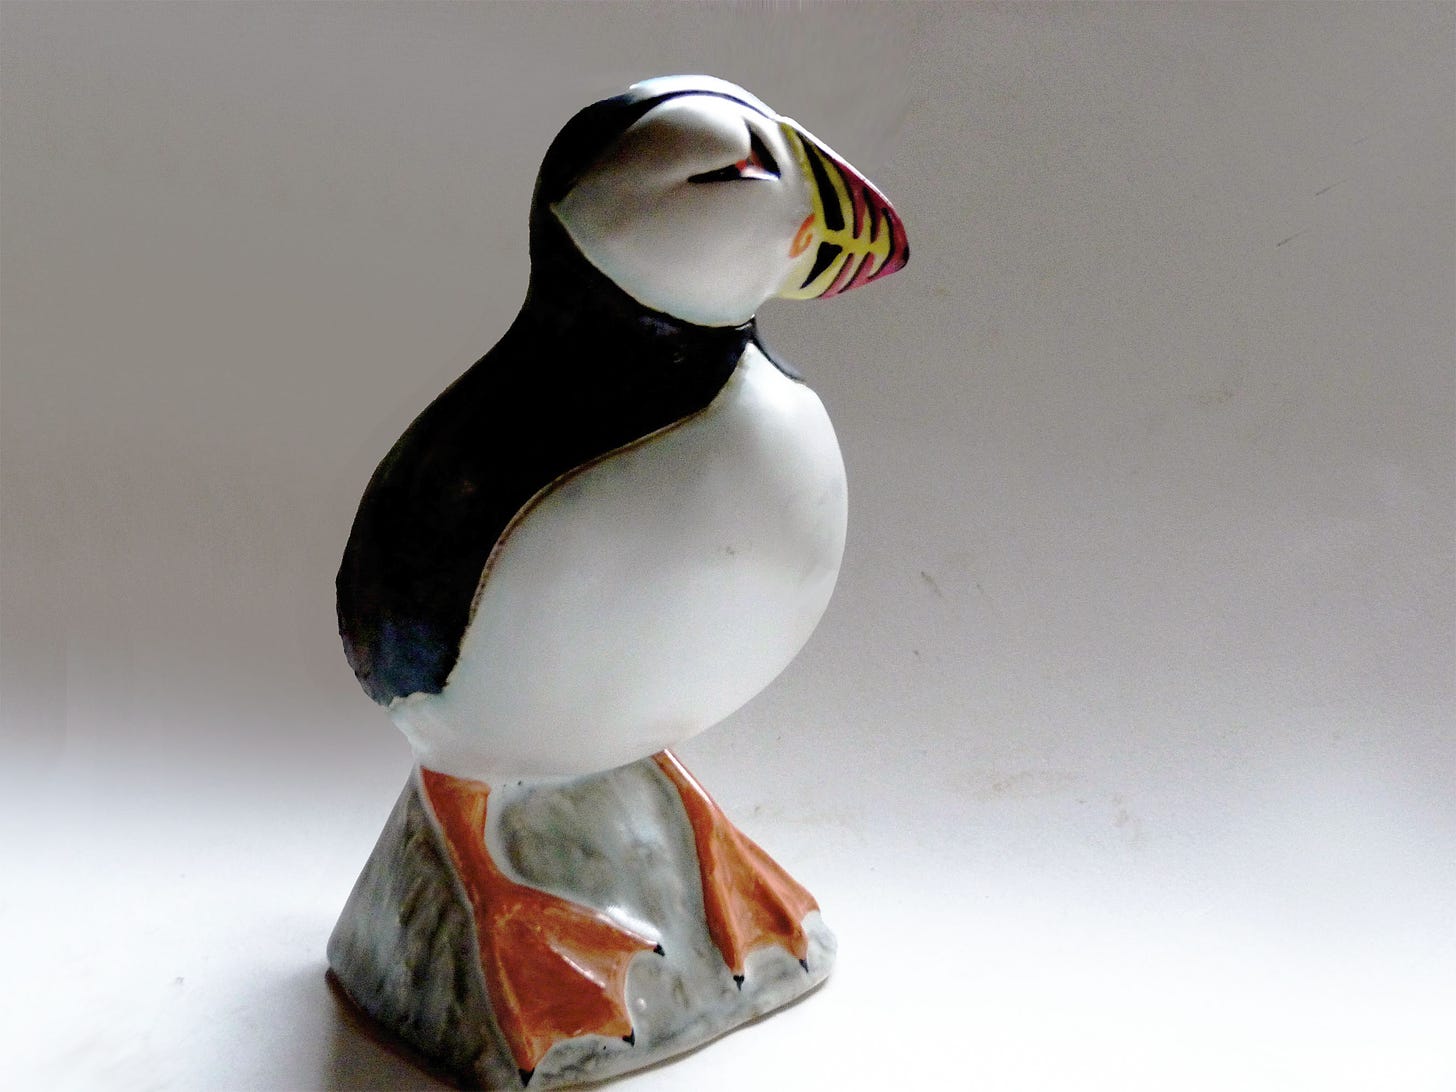 A stoneware slip-cast Puffin designed by Weston Neil Andersen with his affinity for the geometry of natural forms. The back and the mask-covered face is glazed in glossy ebony. The Full ripe chest is glazed in white matte, accentuated by bright coral wide webbed feet. The large dramatic beak is decorated in bright red, yellow, and black overglaze colors in a curved stripe pattern.